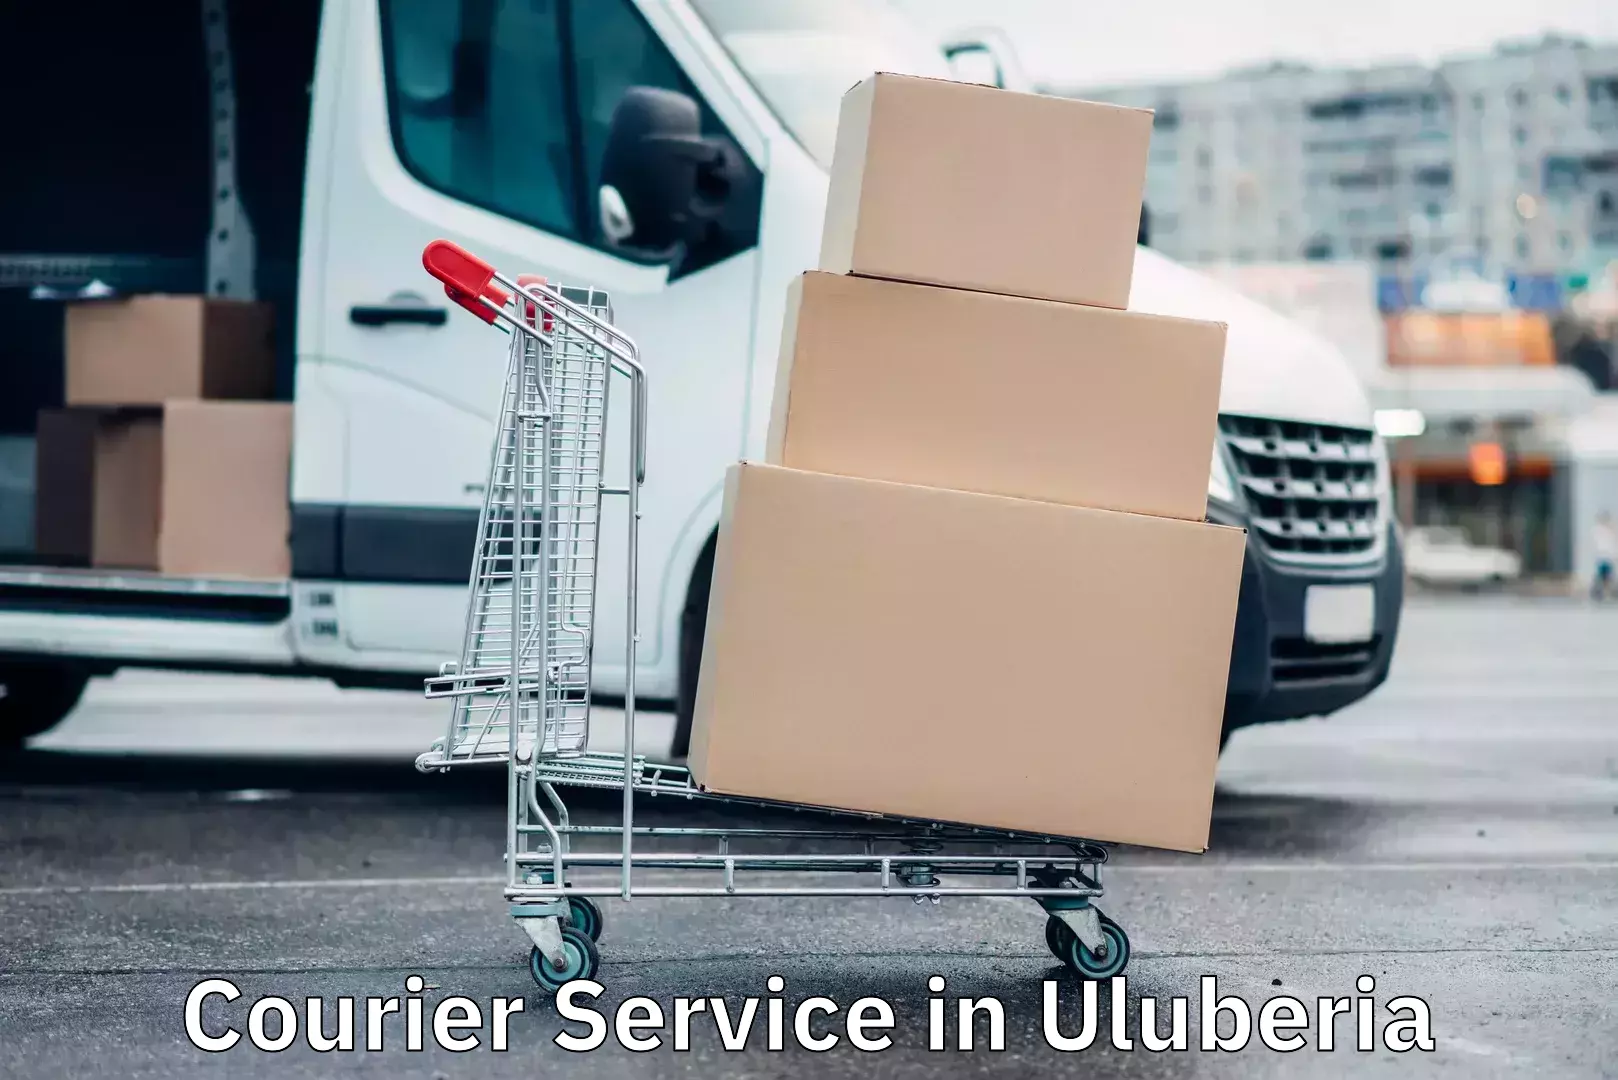 Courier service innovation in Uluberia